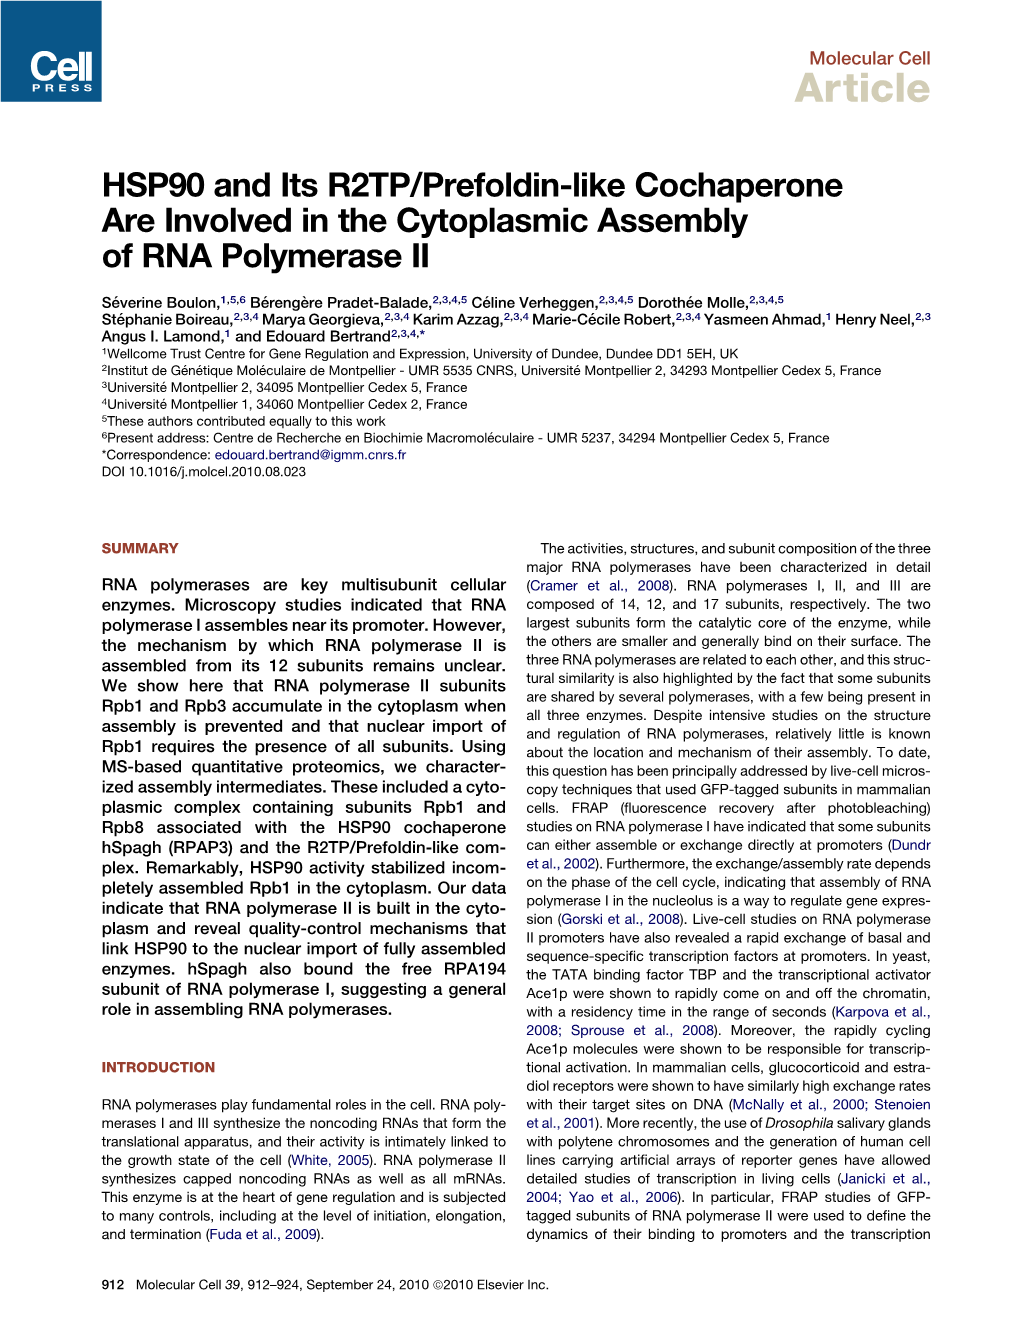 HSP90 and Its R2TP/Prefoldin-Like Cochaperone Are Involved in the Cytoplasmic Assembly of RNA Polymerase II